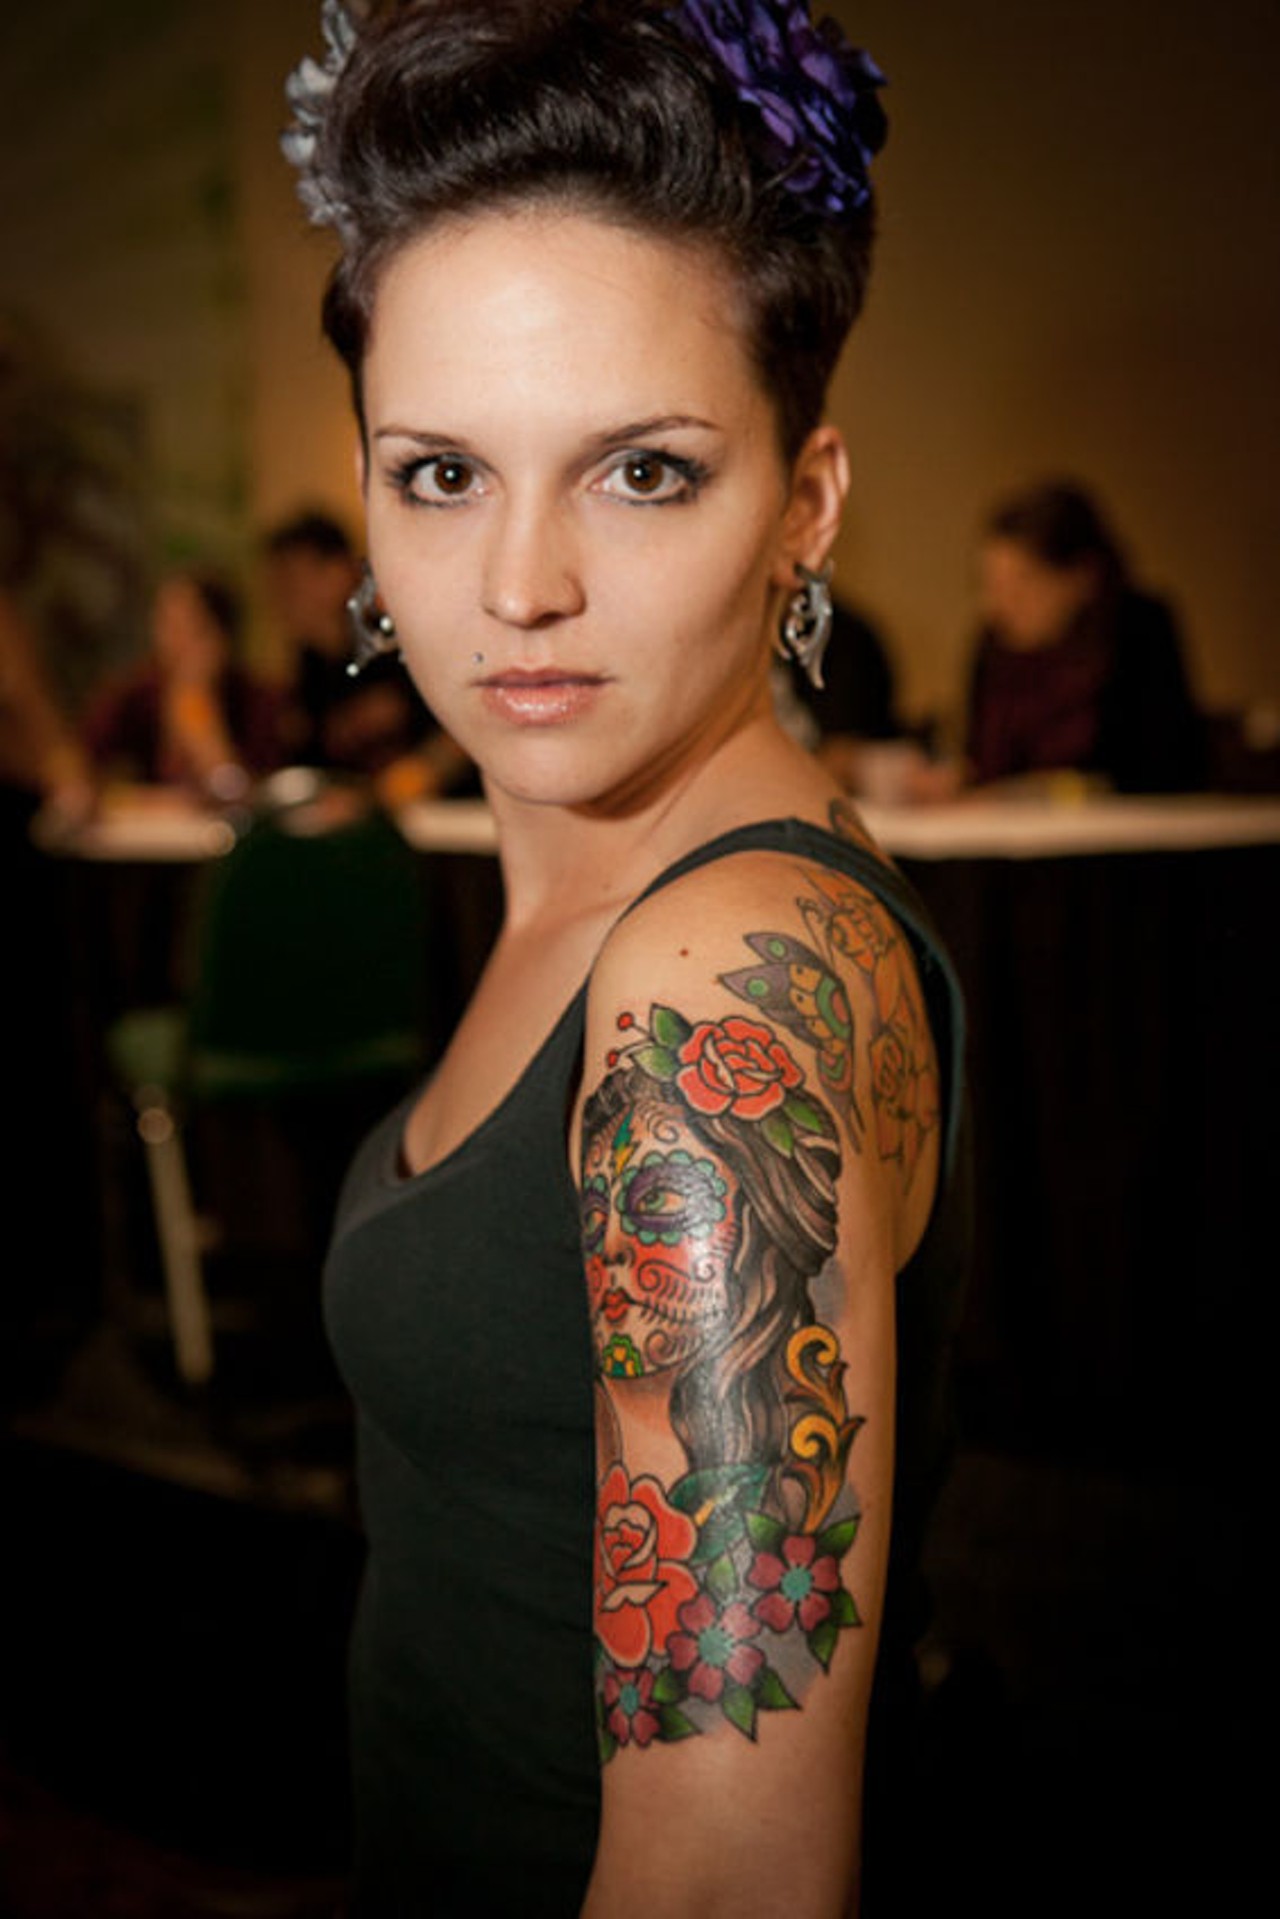 See more photos from the Old School Tattoo Expo.